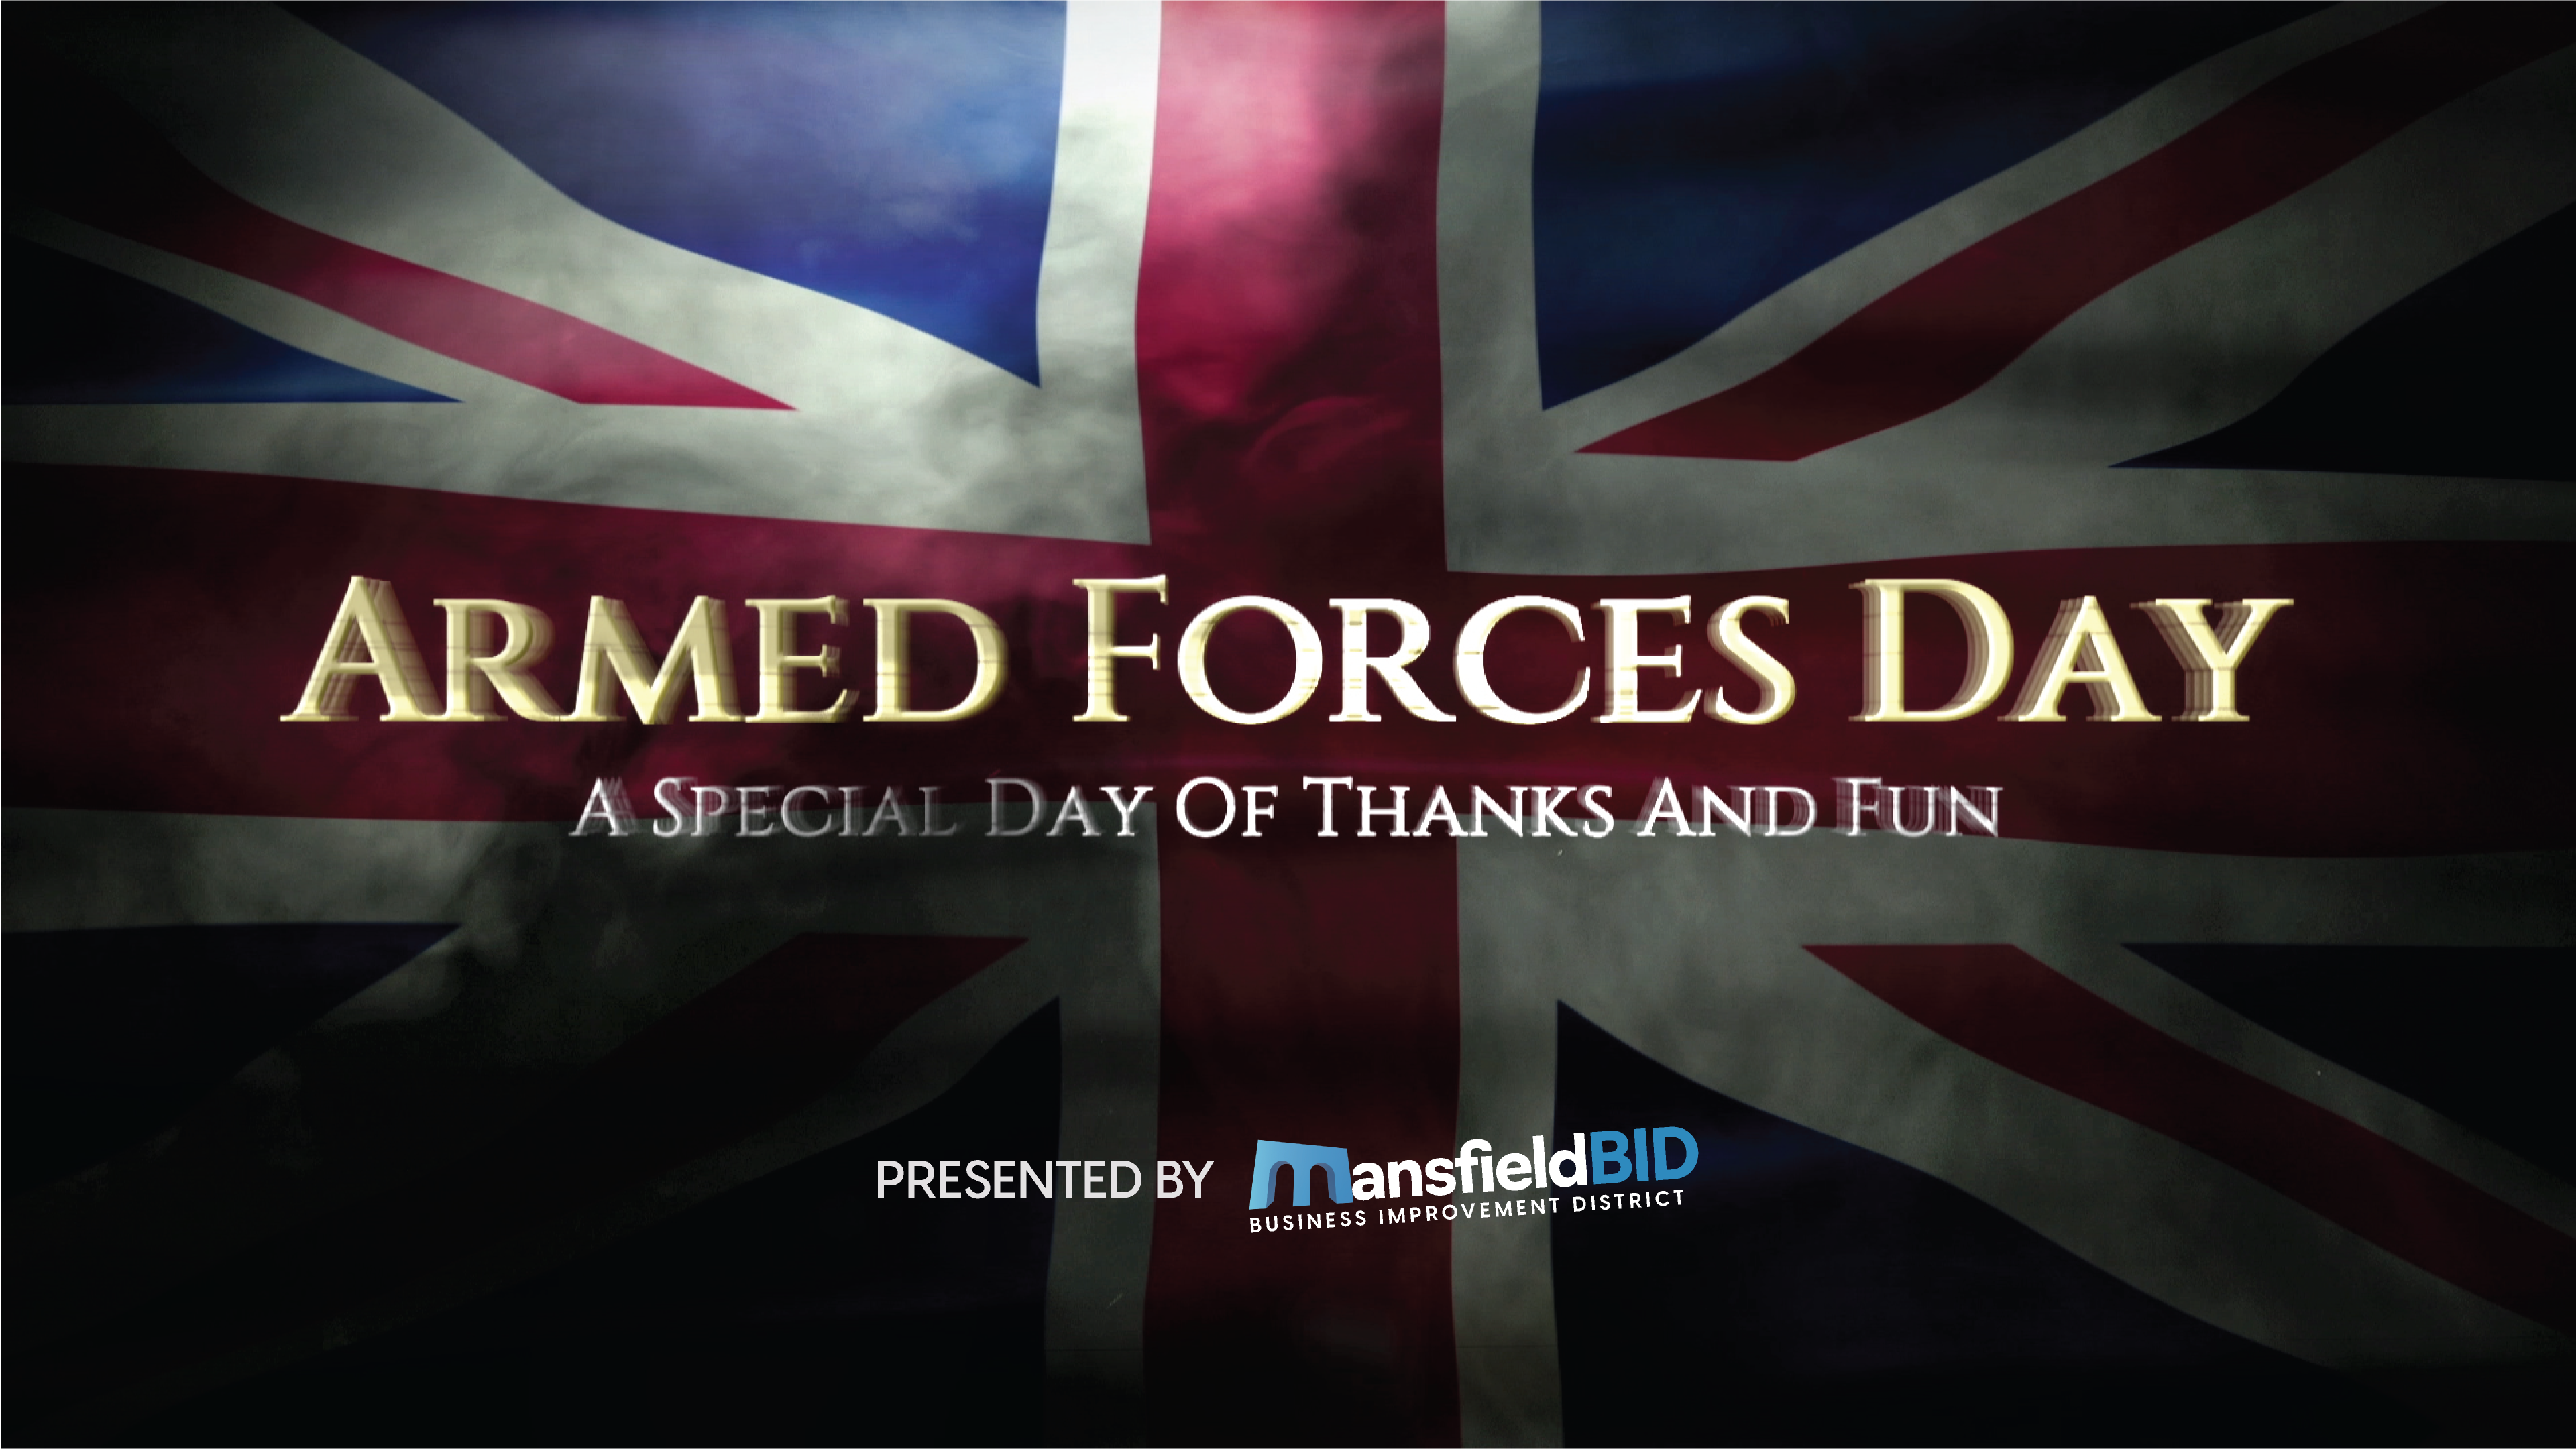 Armed Forces Day, a special day for thanks and fun text, organised by BID with union flag background